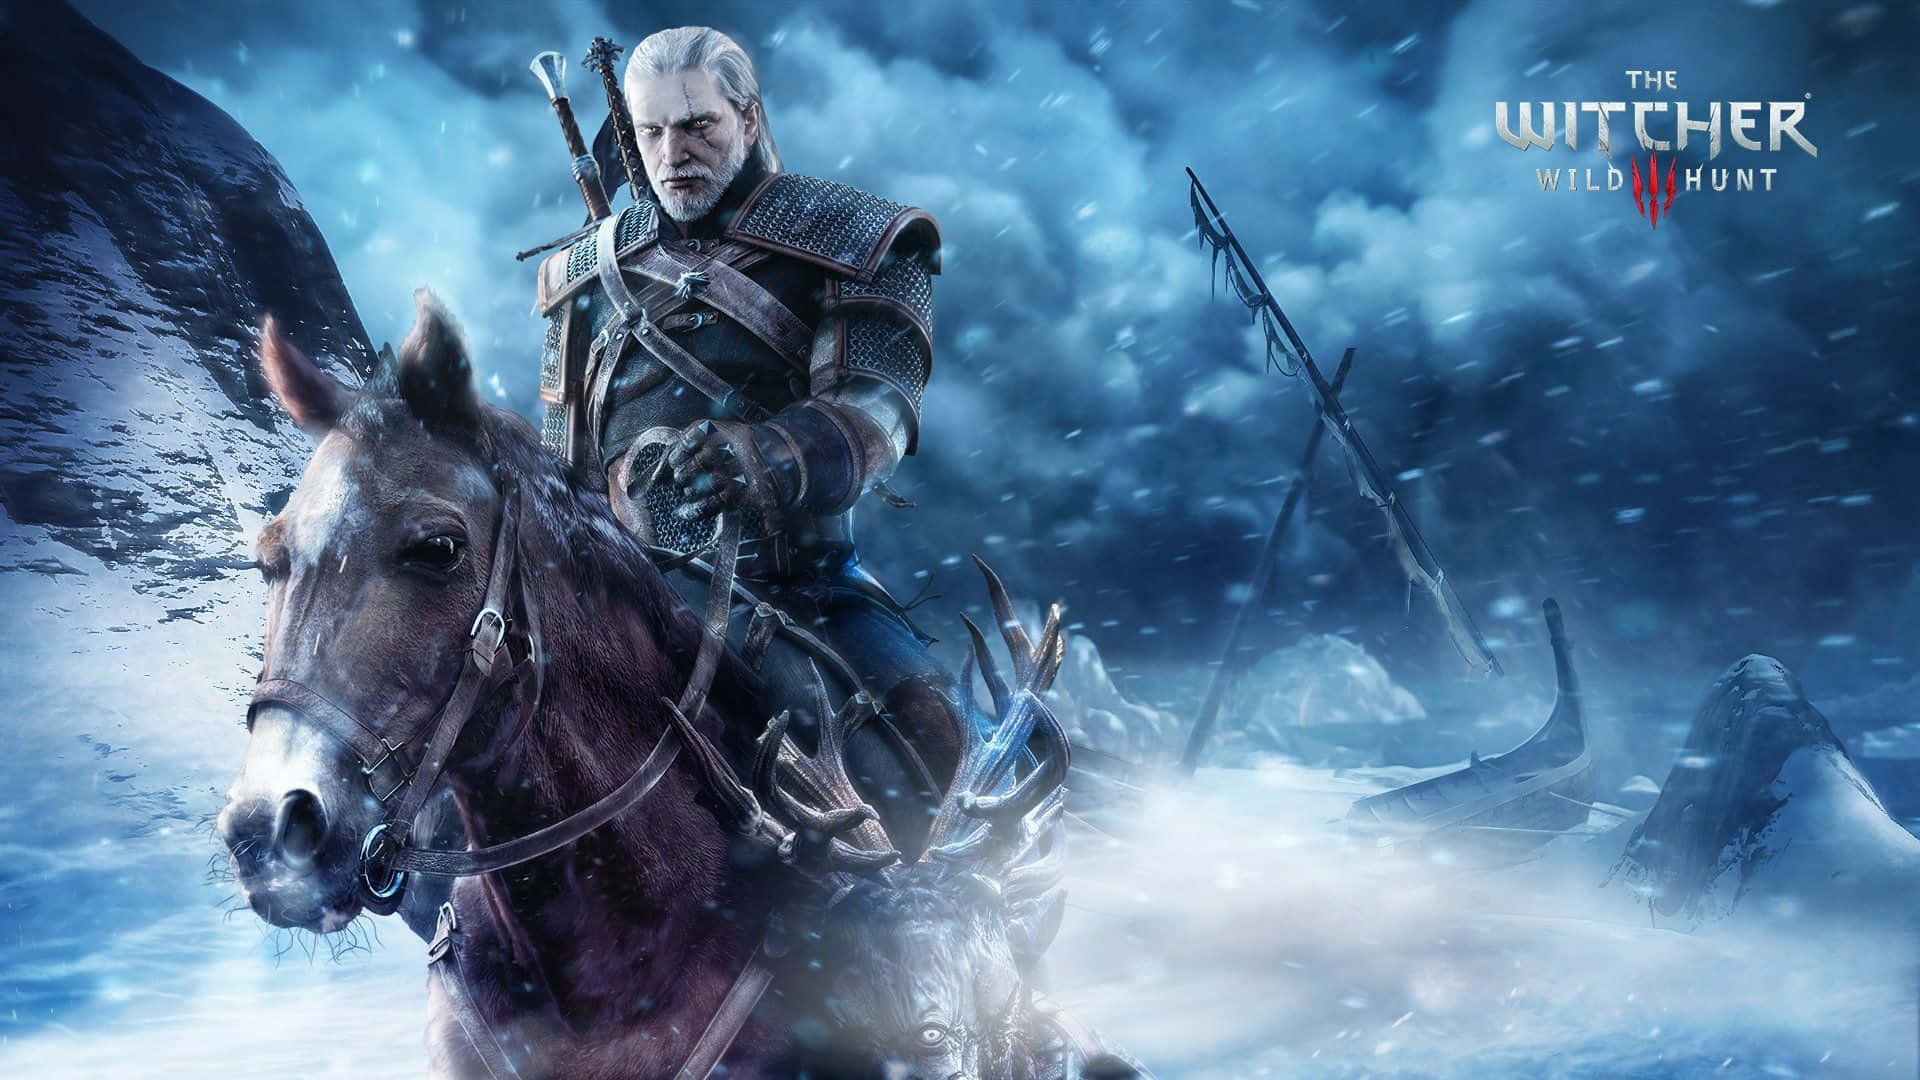 Ready to explore The Witcher 3 on your desktop? Wallpaper